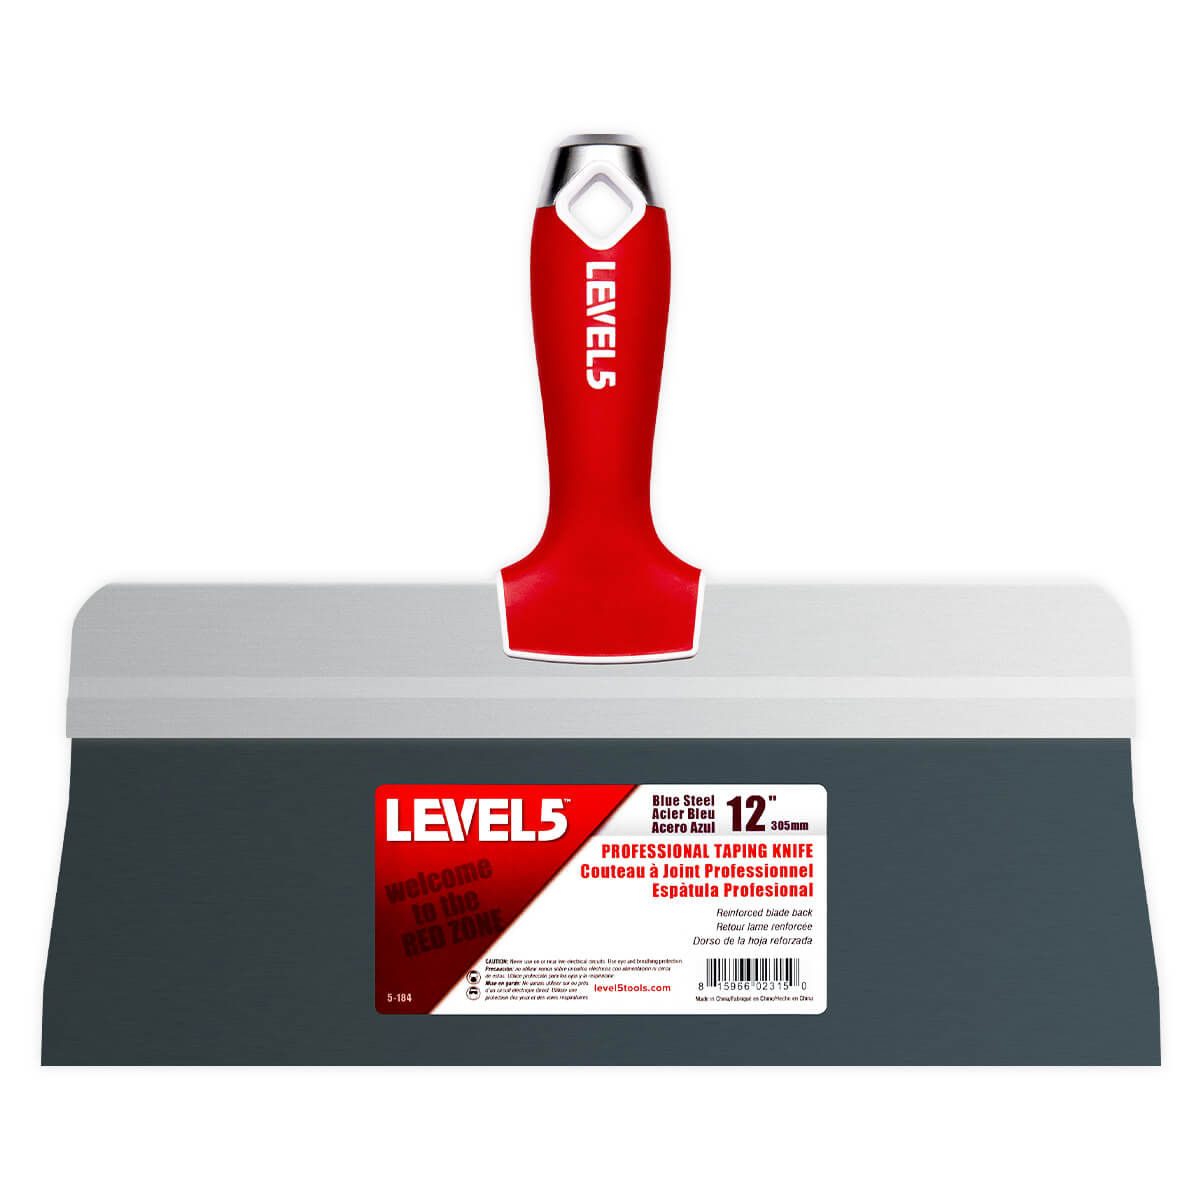 Level 5 Blue Steel Big Back Taping Knives